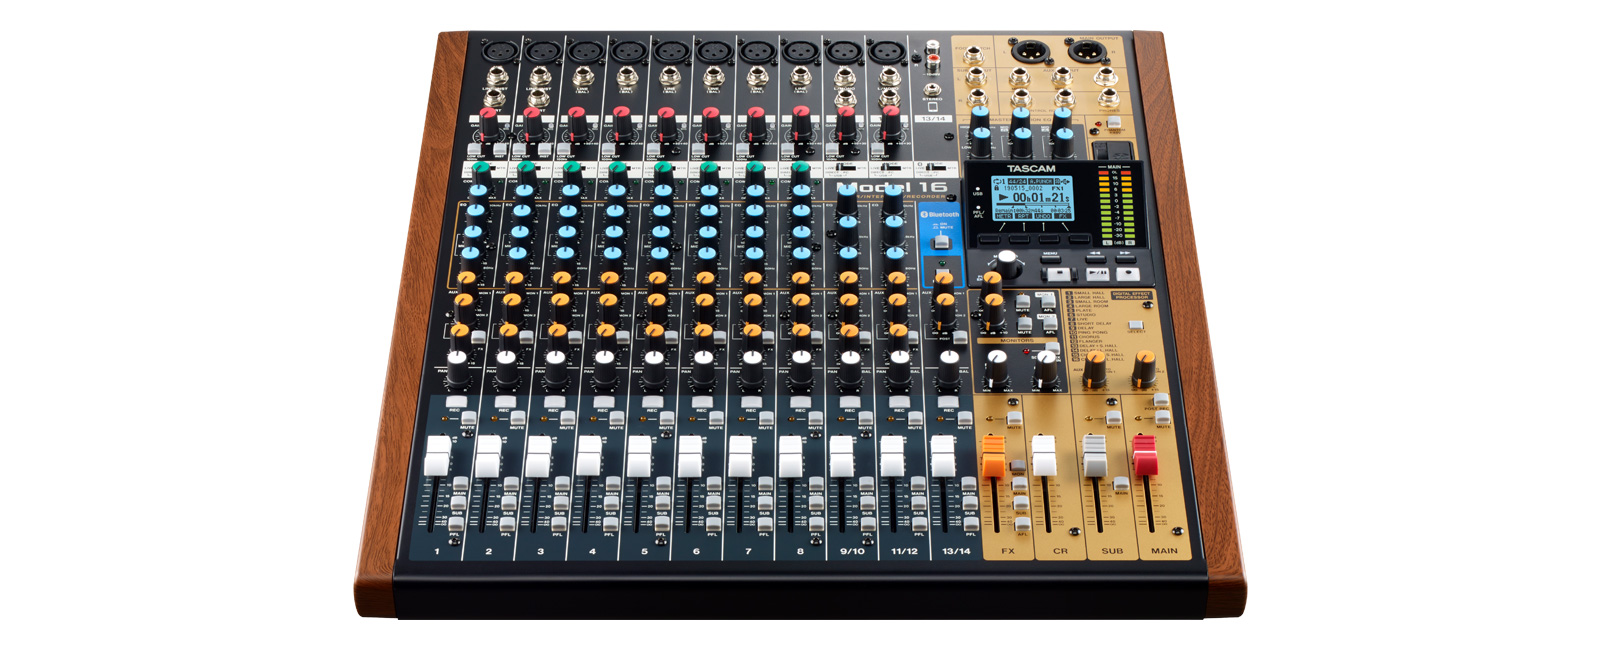 TASCAM Introduces the Model 16 All-In-One Mixing Studio | News Details